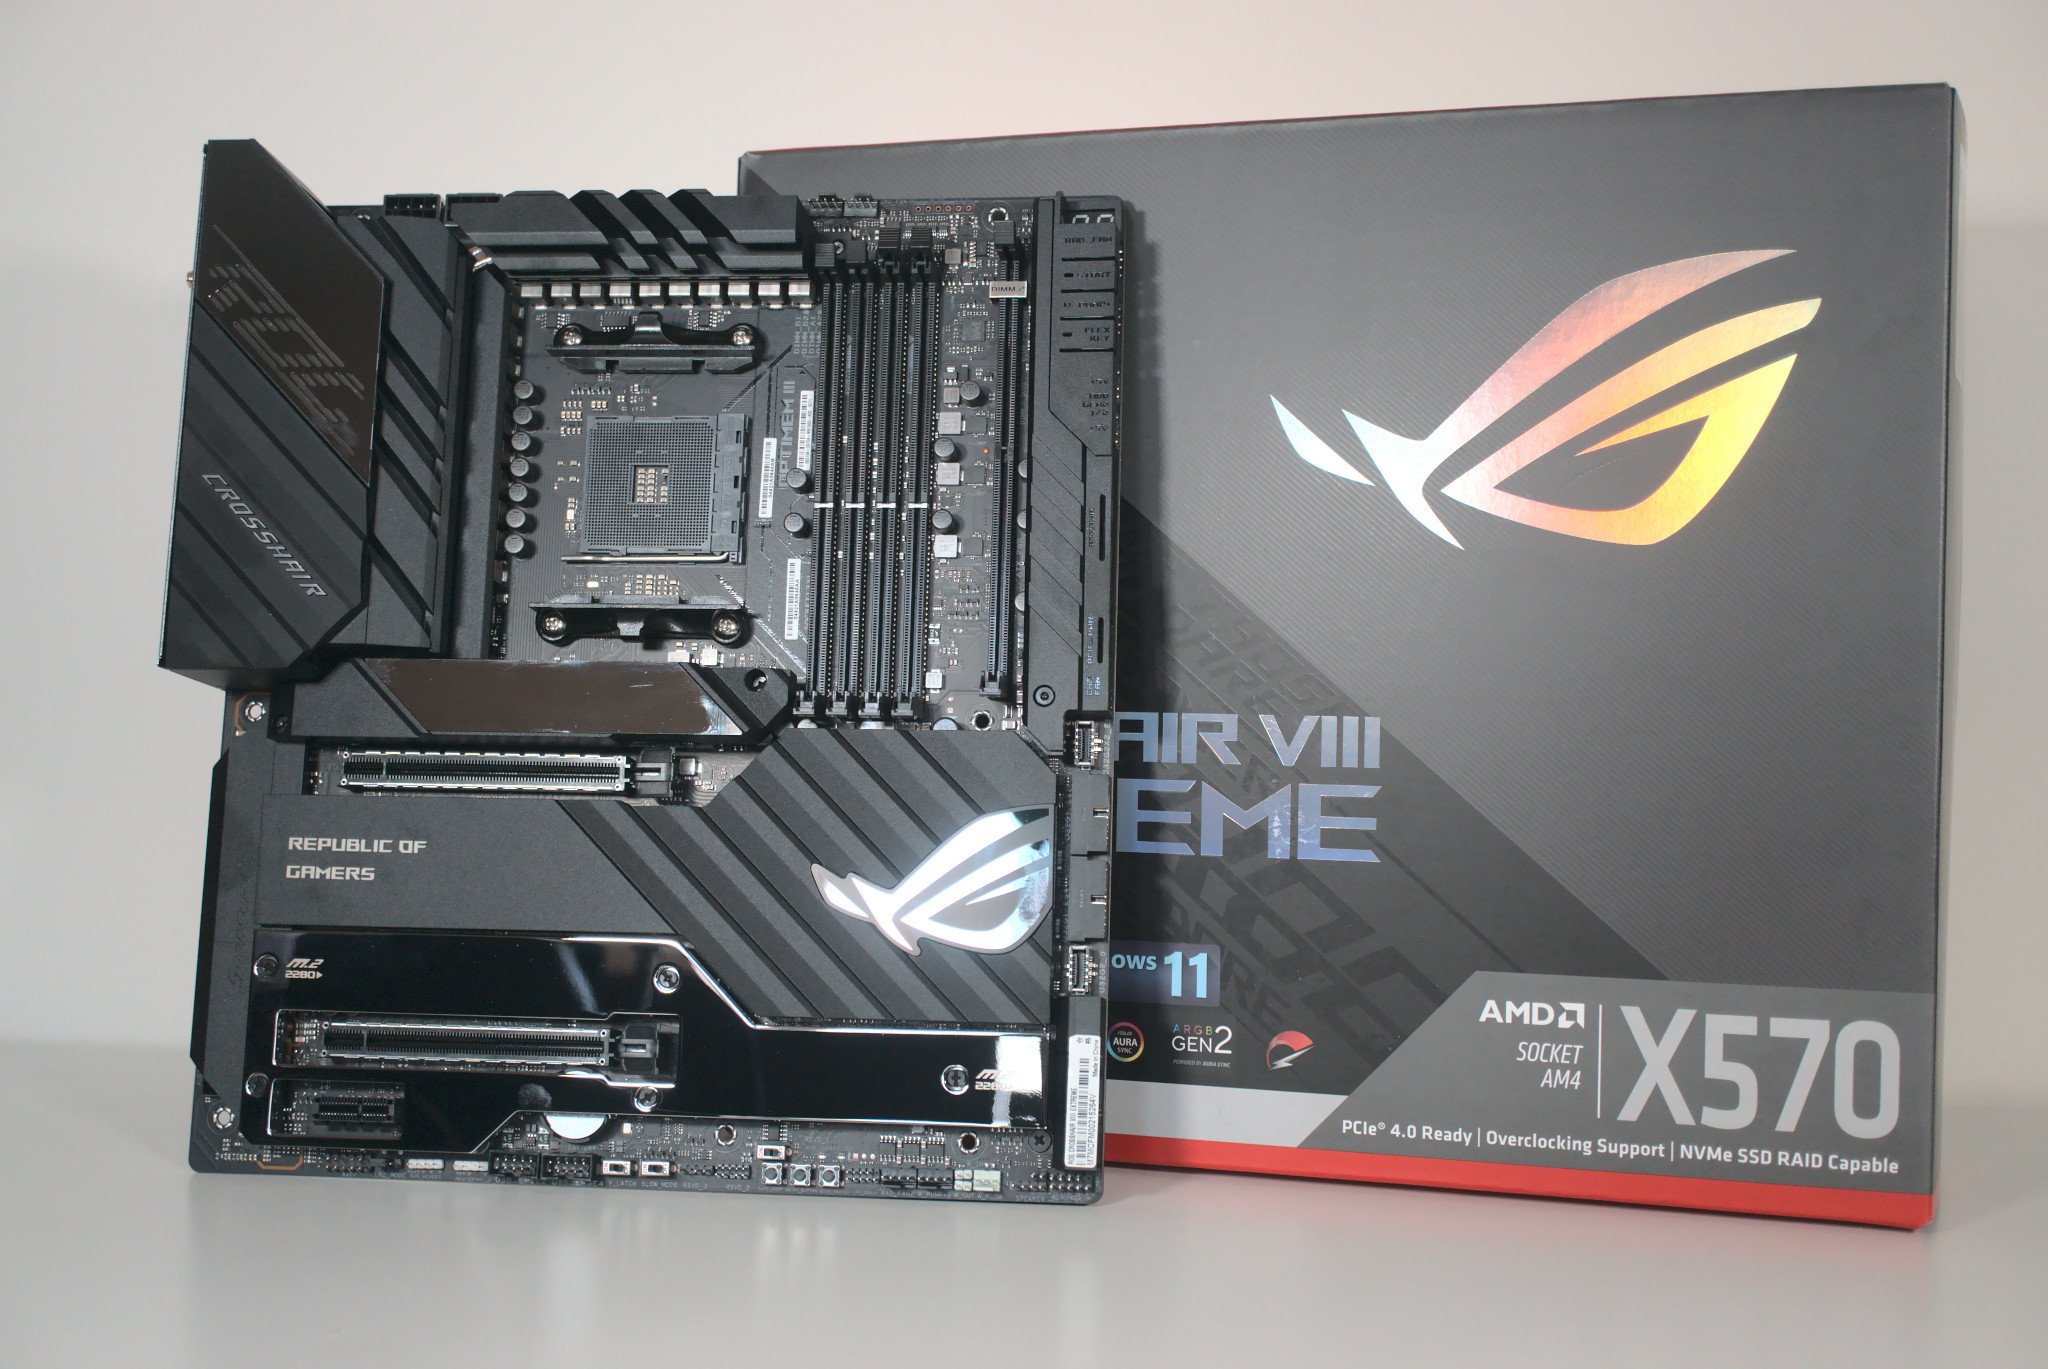 ASUS ROG X570 Crosshair VIII Extreme review: A match made in